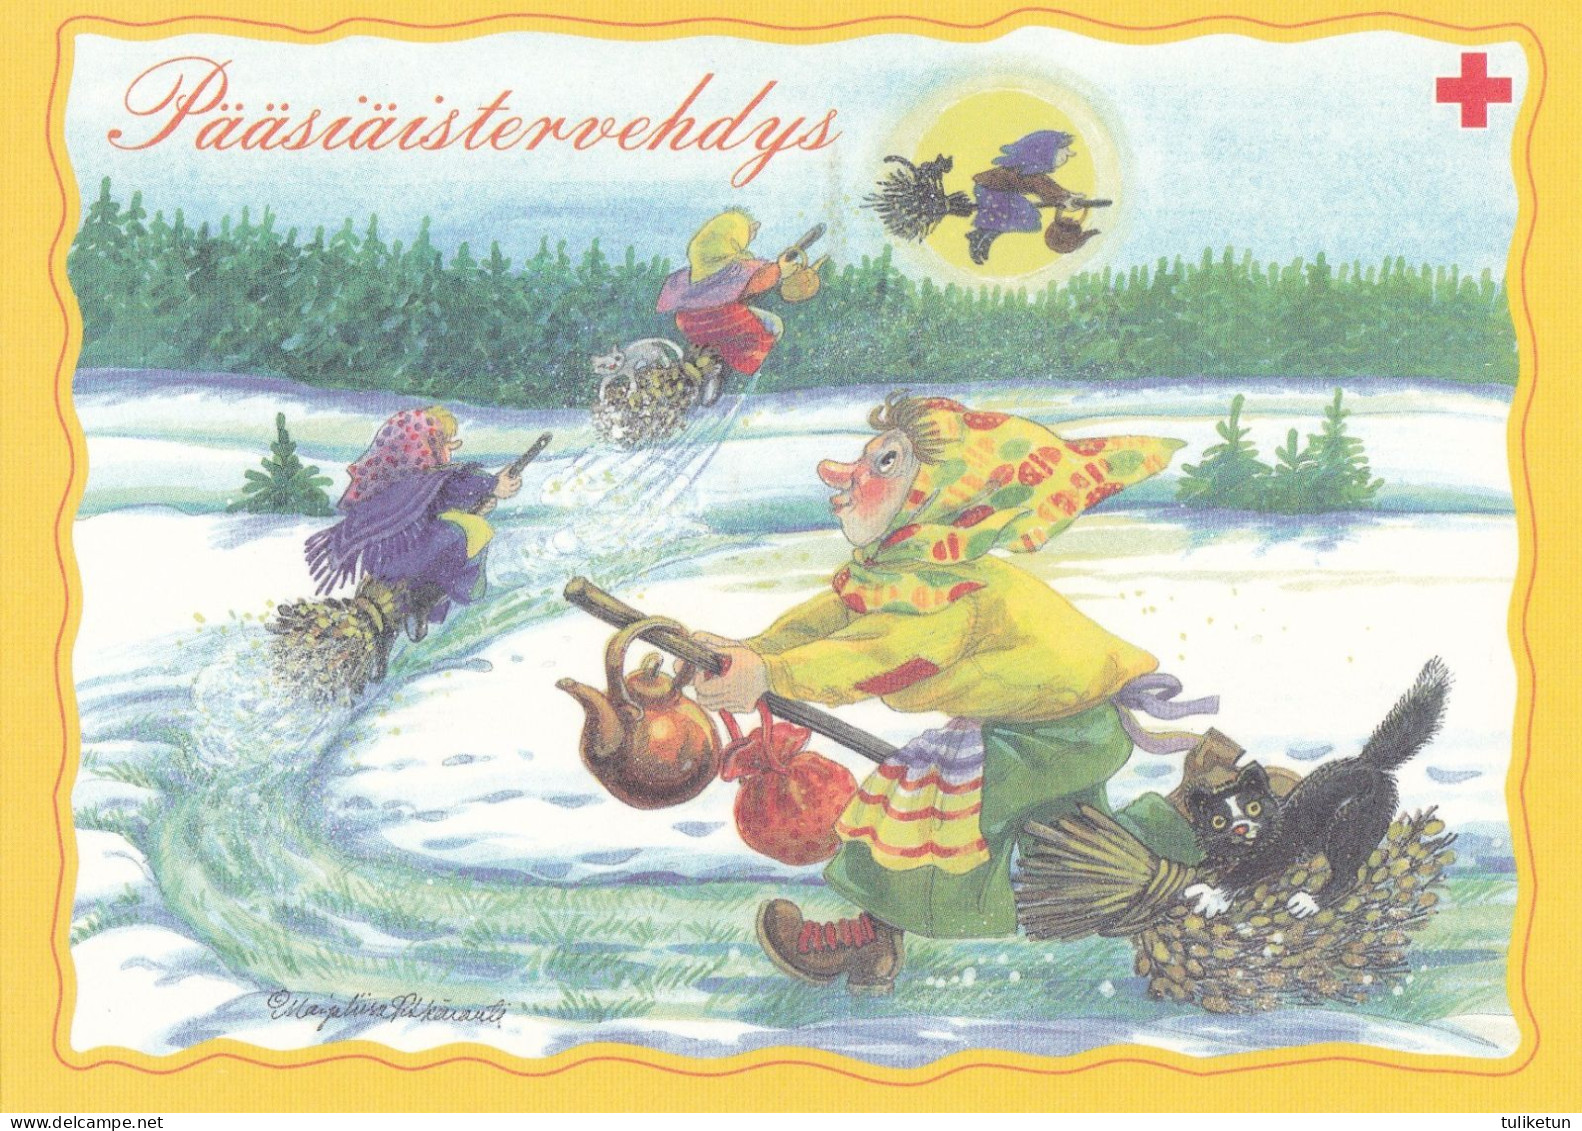 Postal Stationery - Flowers - Easter Witches With Cats - Red Cross 2001 - Suomi Finland - Postage Paid - Interi Postali